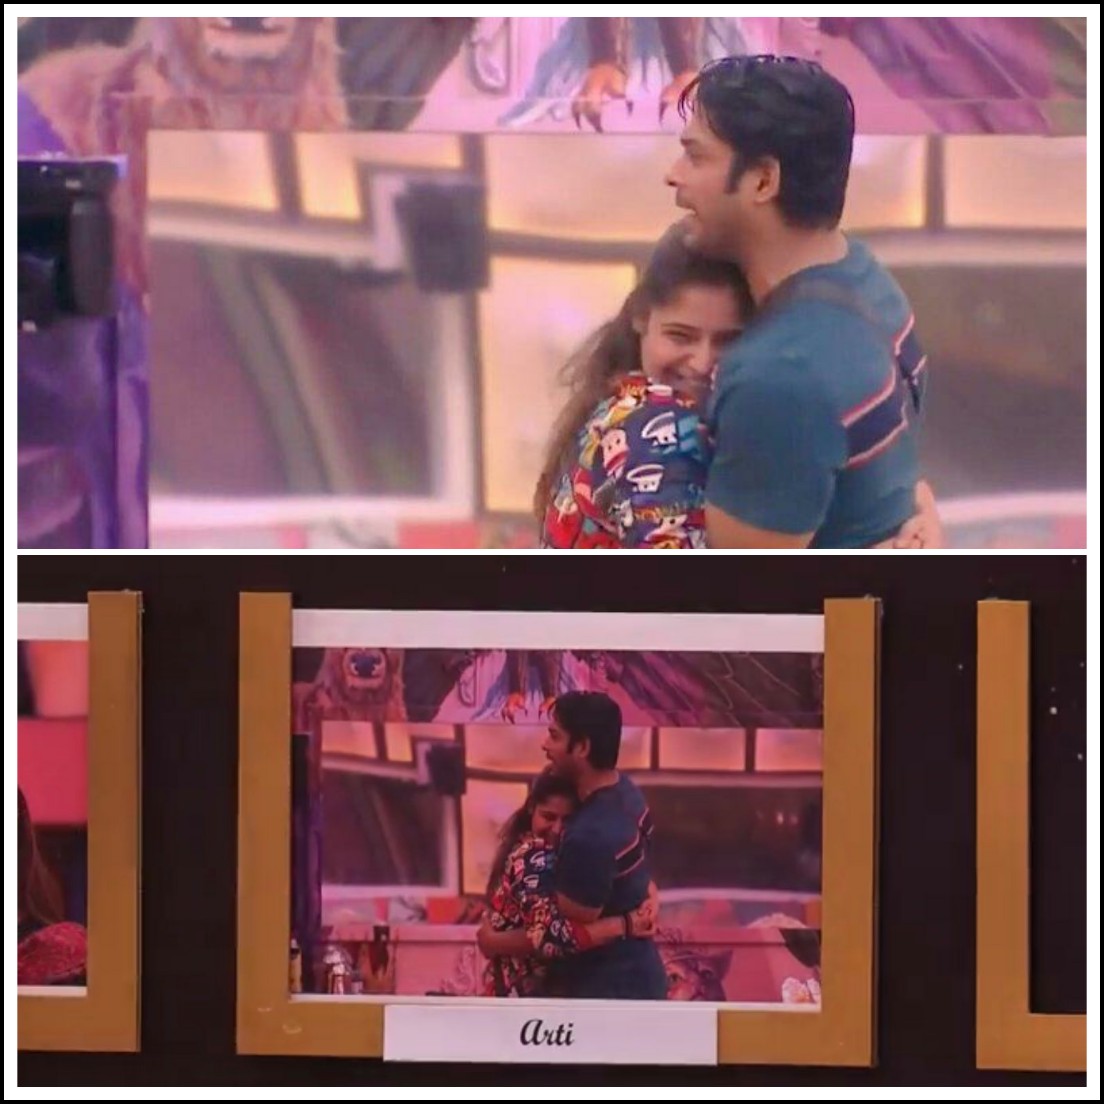 Aarti x Sidharth.We've seen sid used to share childhood memories with arti most of the time! Thanks for  #SidArti moments!A Good friend  @ArtiSingh005.Thanks Sidharth ke kaam krne k liye